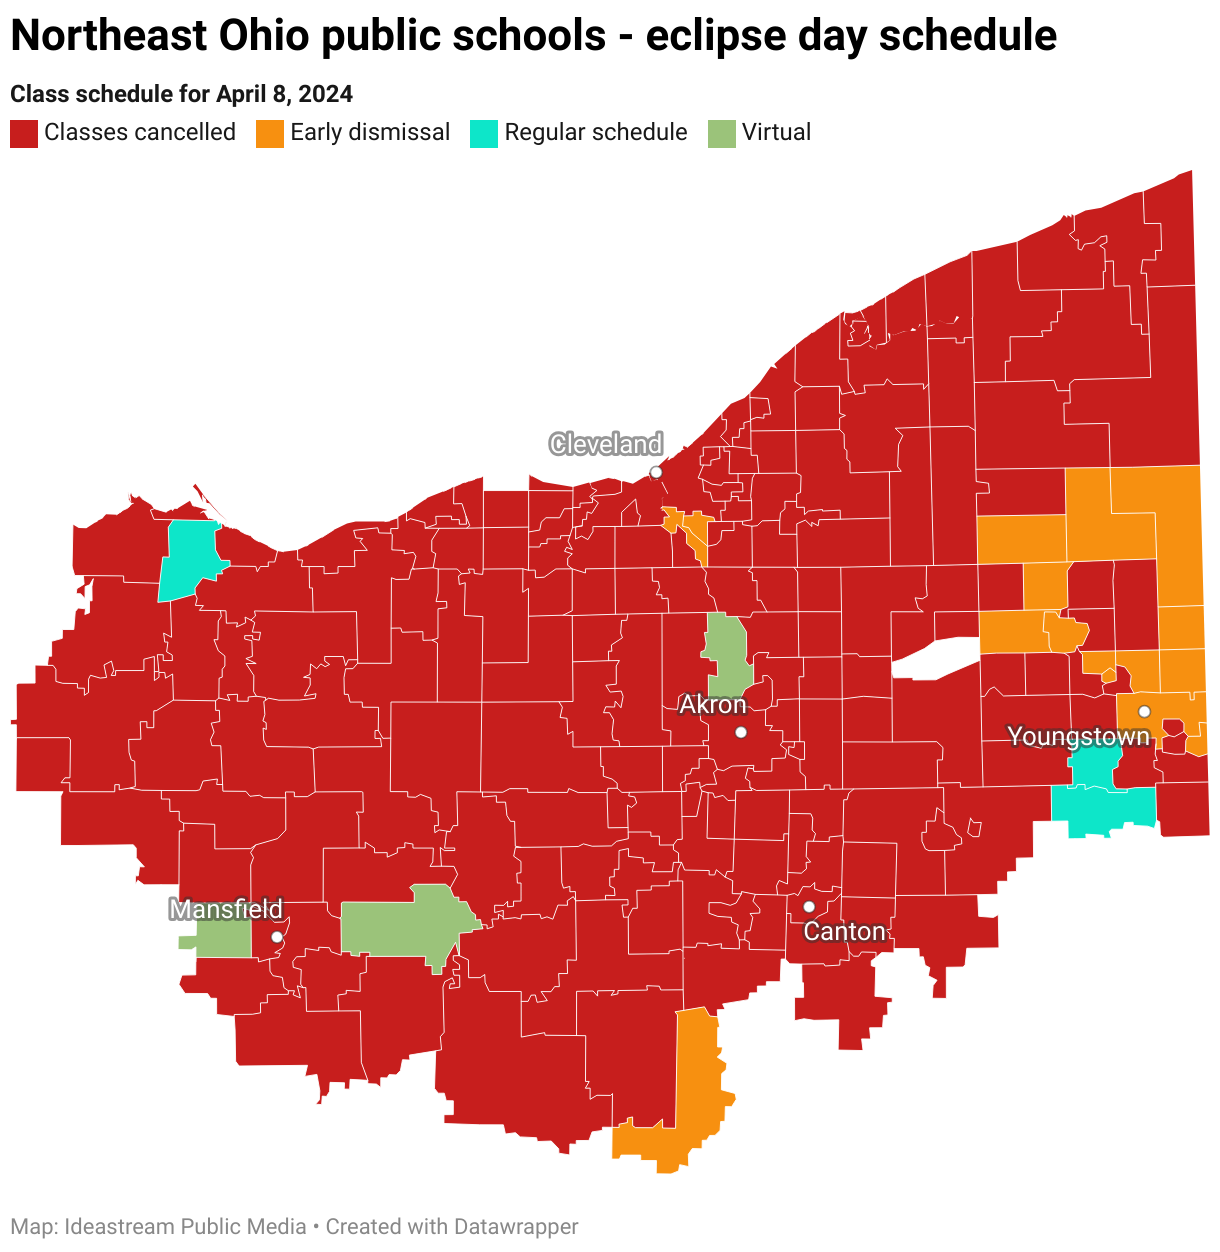 A survey of school districts in the path of totality for the April 8, 2024 solar eclipse on whether or not they're cancelling classes for the day.